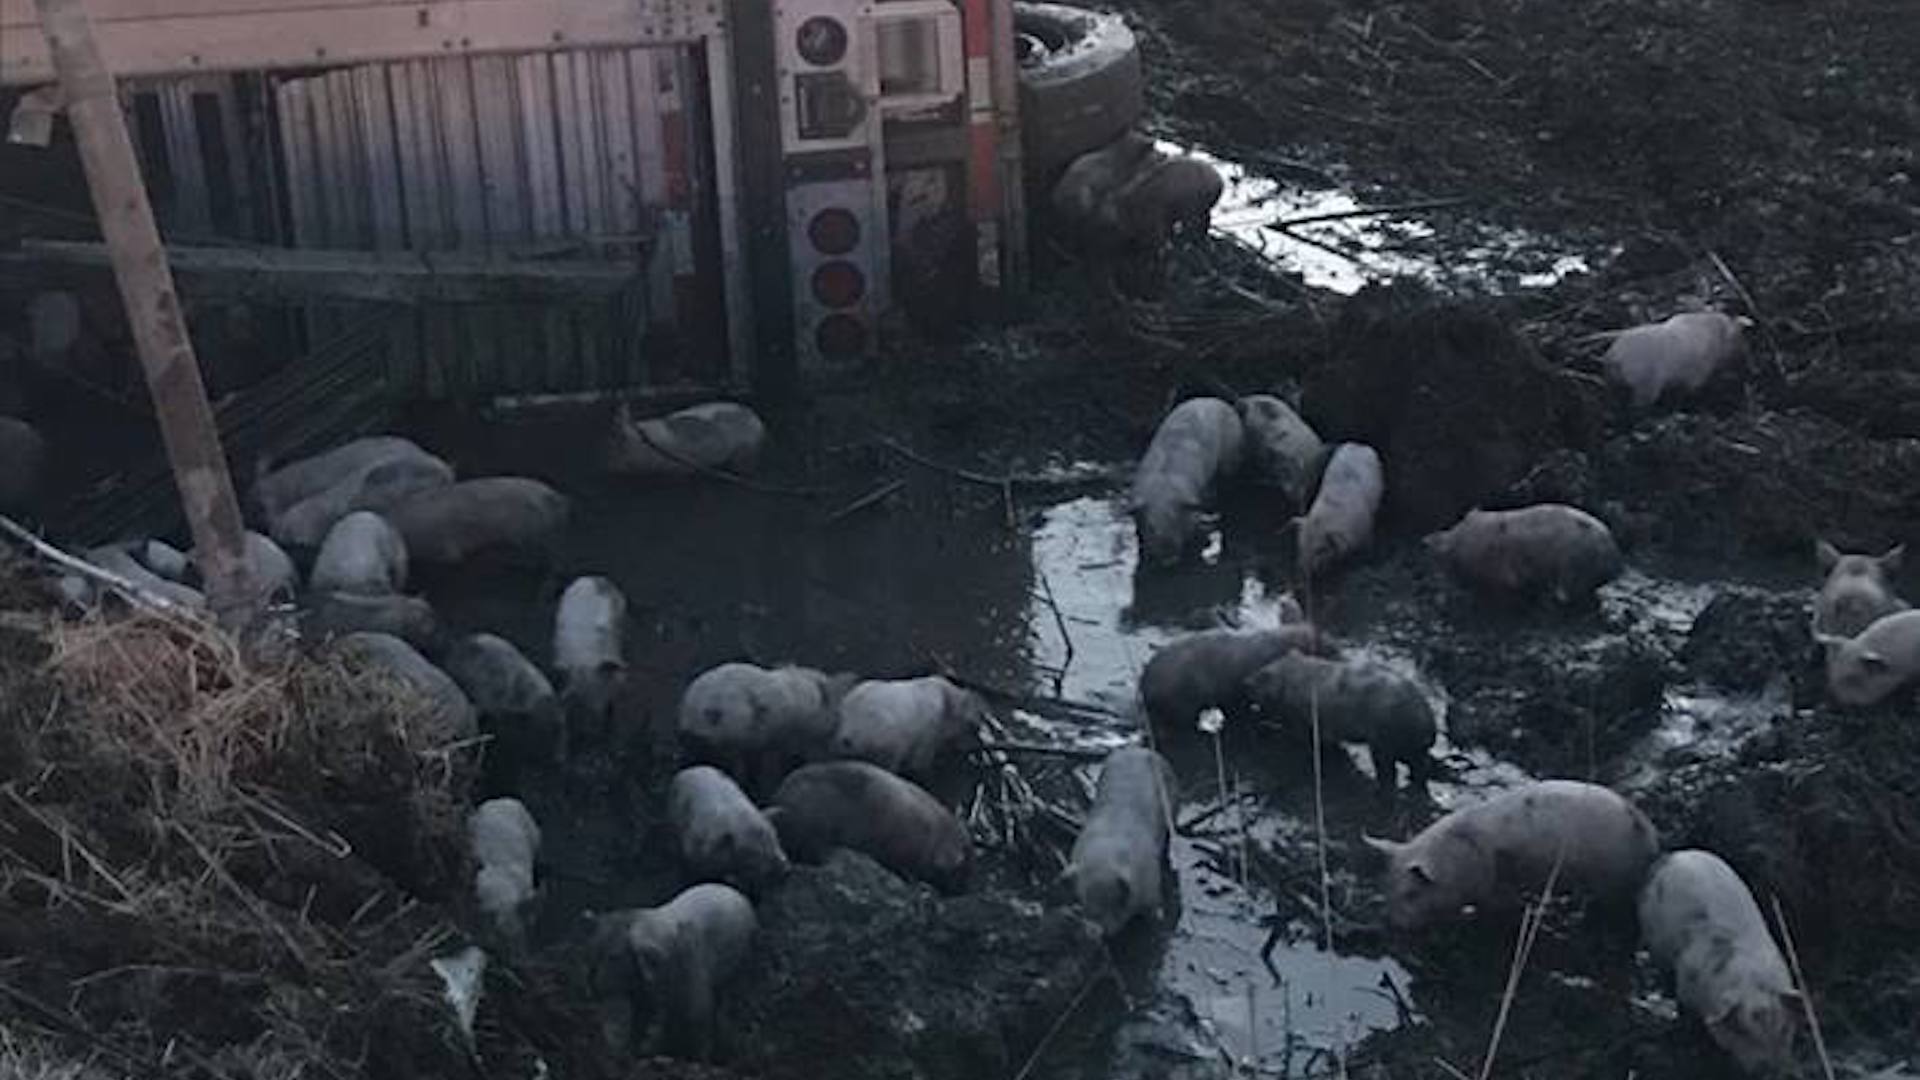 Thousands of Piglets Invade Illinois Highway After Semi Headed to Slaughter Overturns